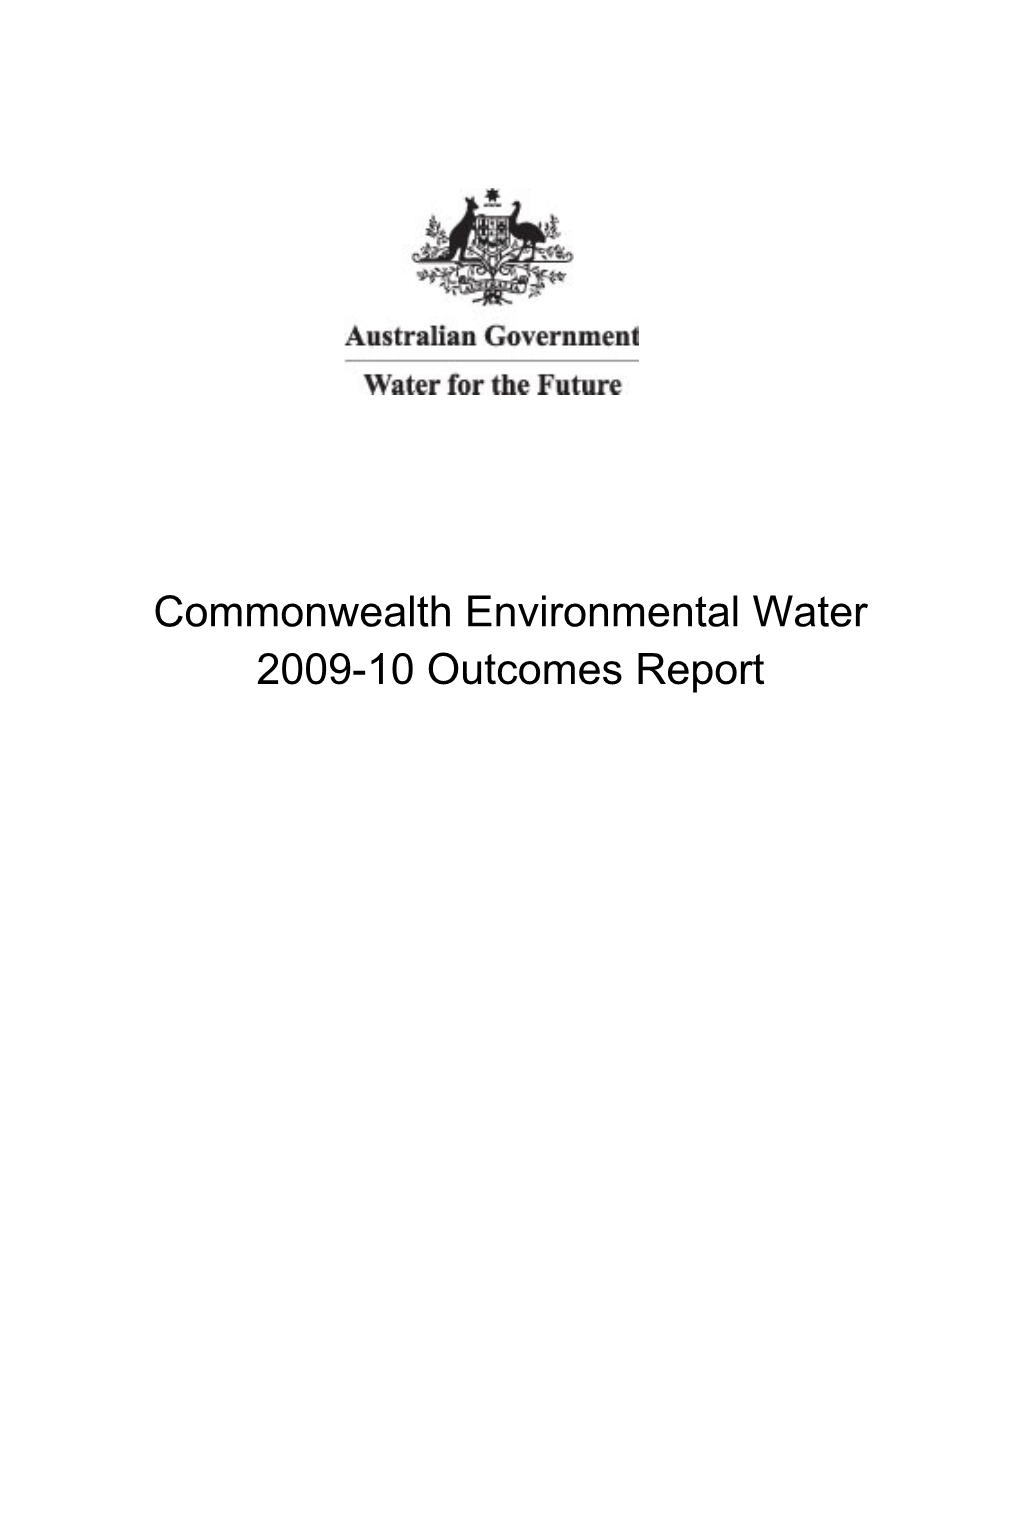 Commonwealth Environmental Water 2009-10 Outcomes Report